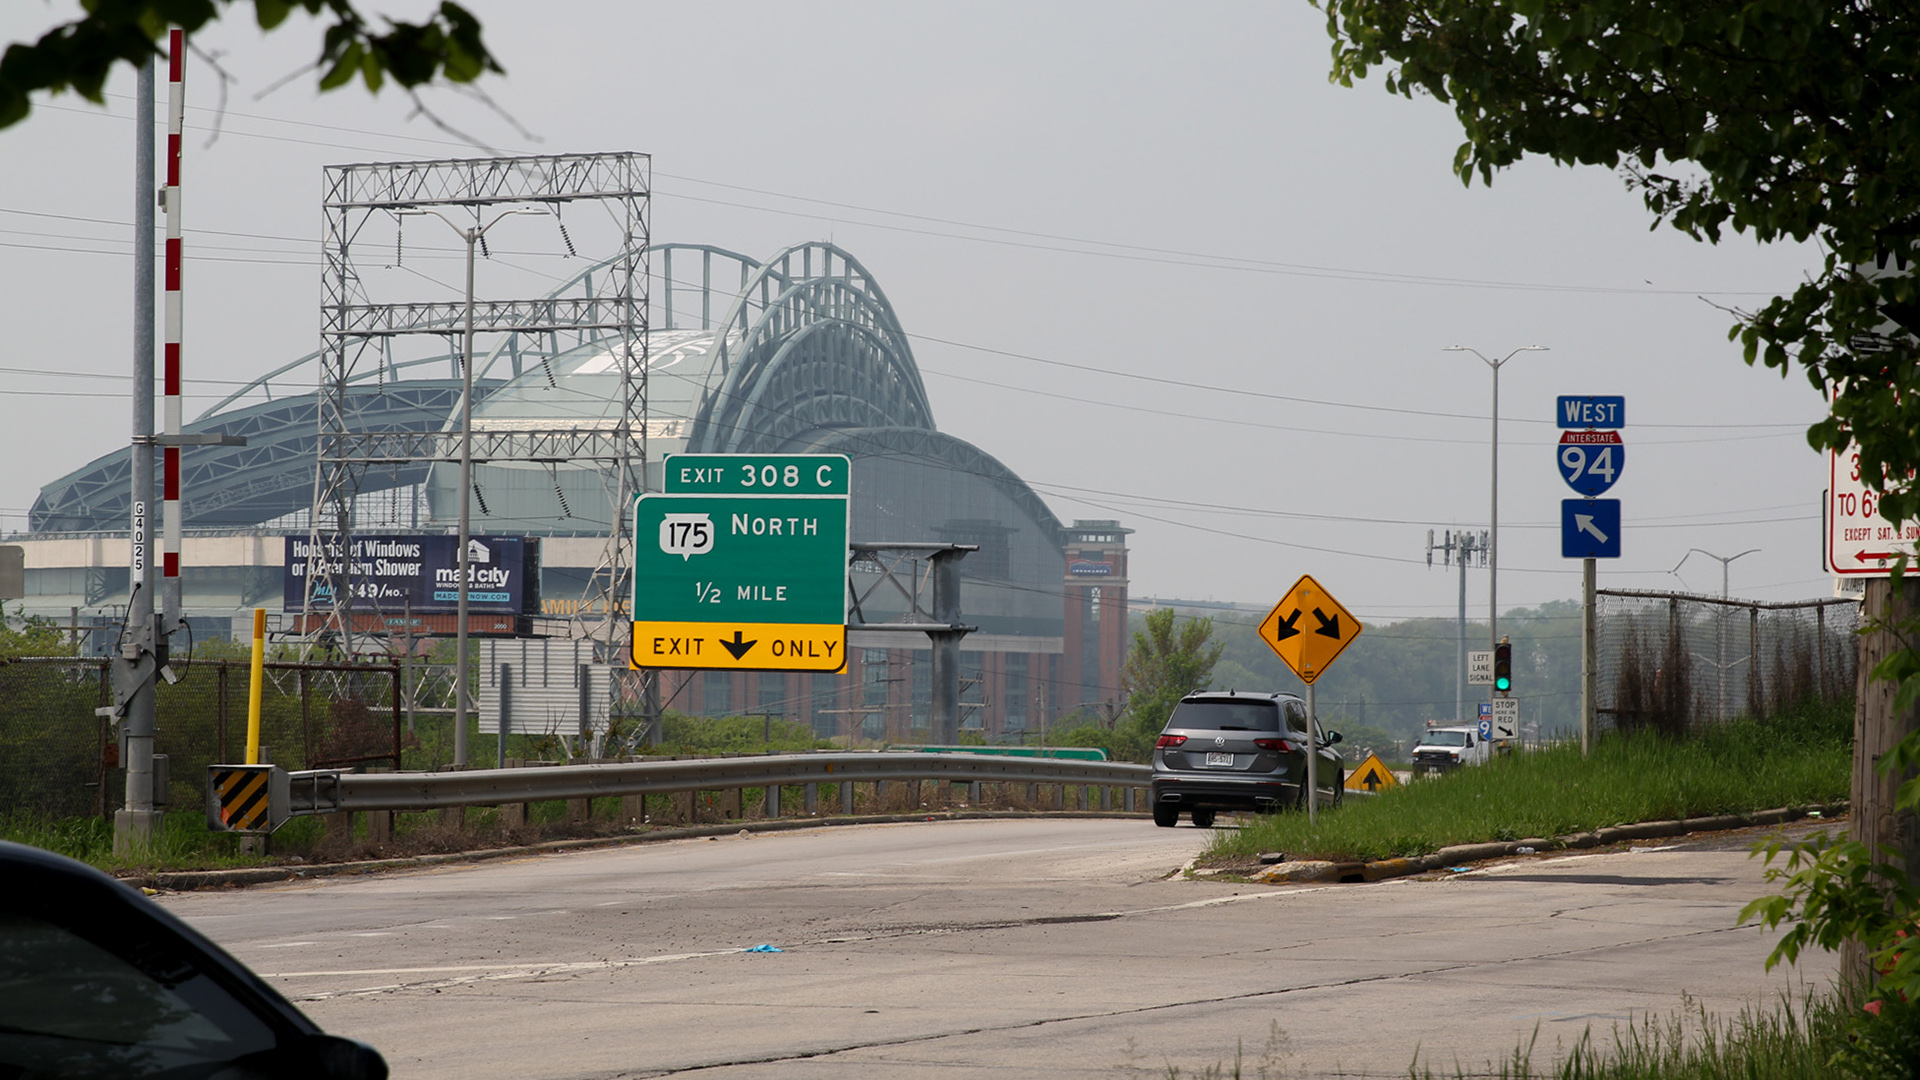 A vehicle drives along the entrance to a highway, with trees in the foreground and the Milwaukee Brewers stadium visible in the background.